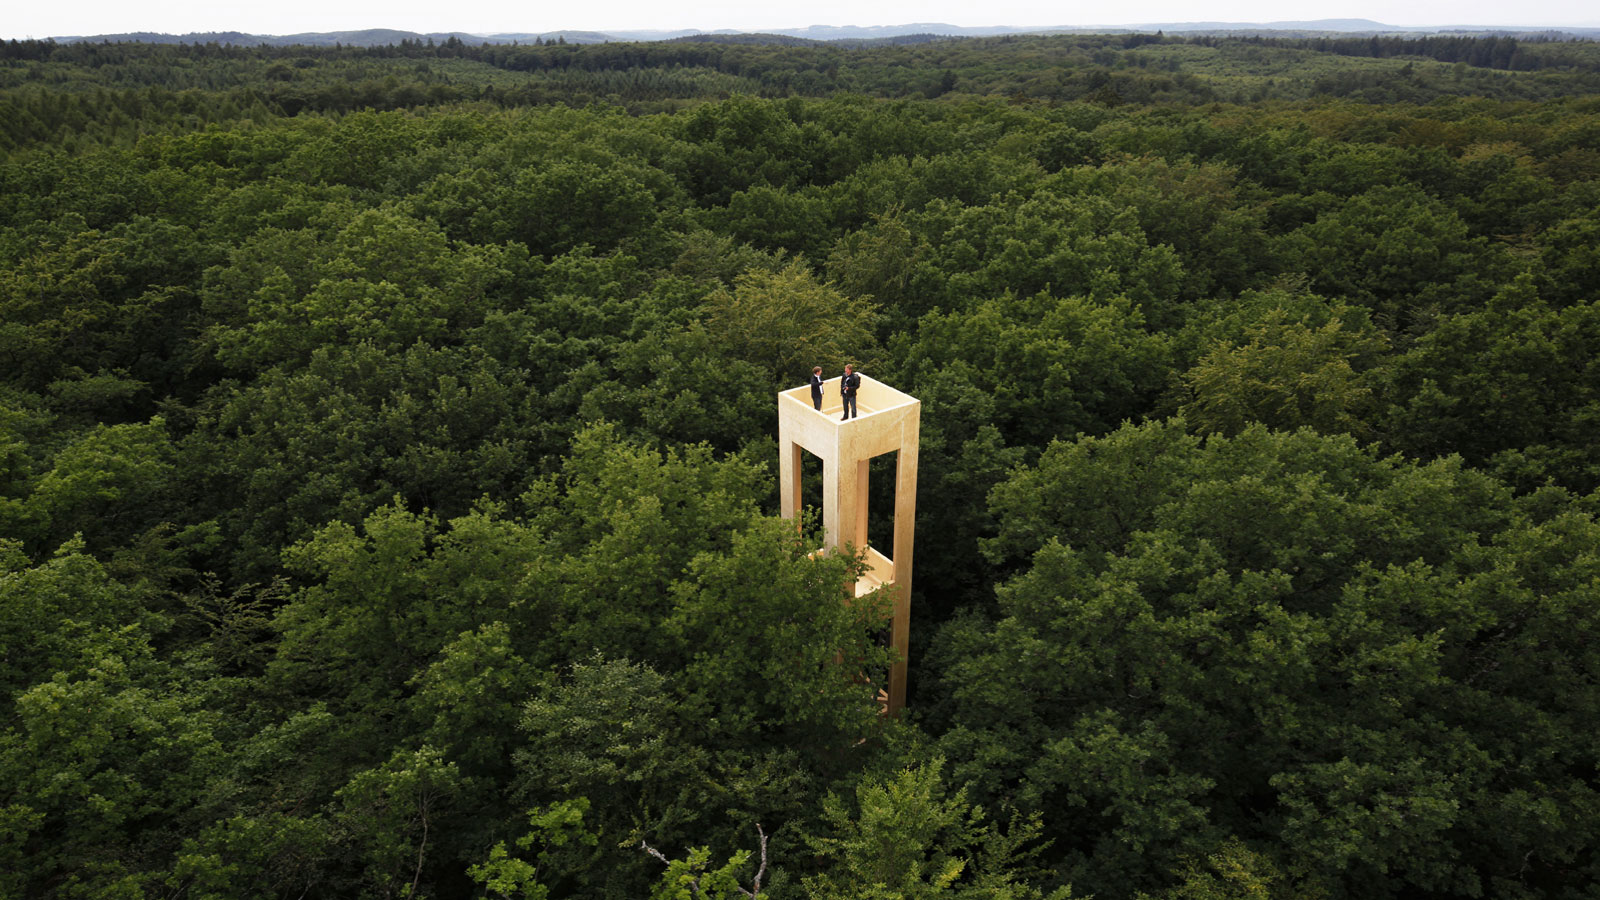 canopy_tower_RCA2018_palatinate_forest_KIRCHSPITZ_image_by_Sven_Paustian.jpg